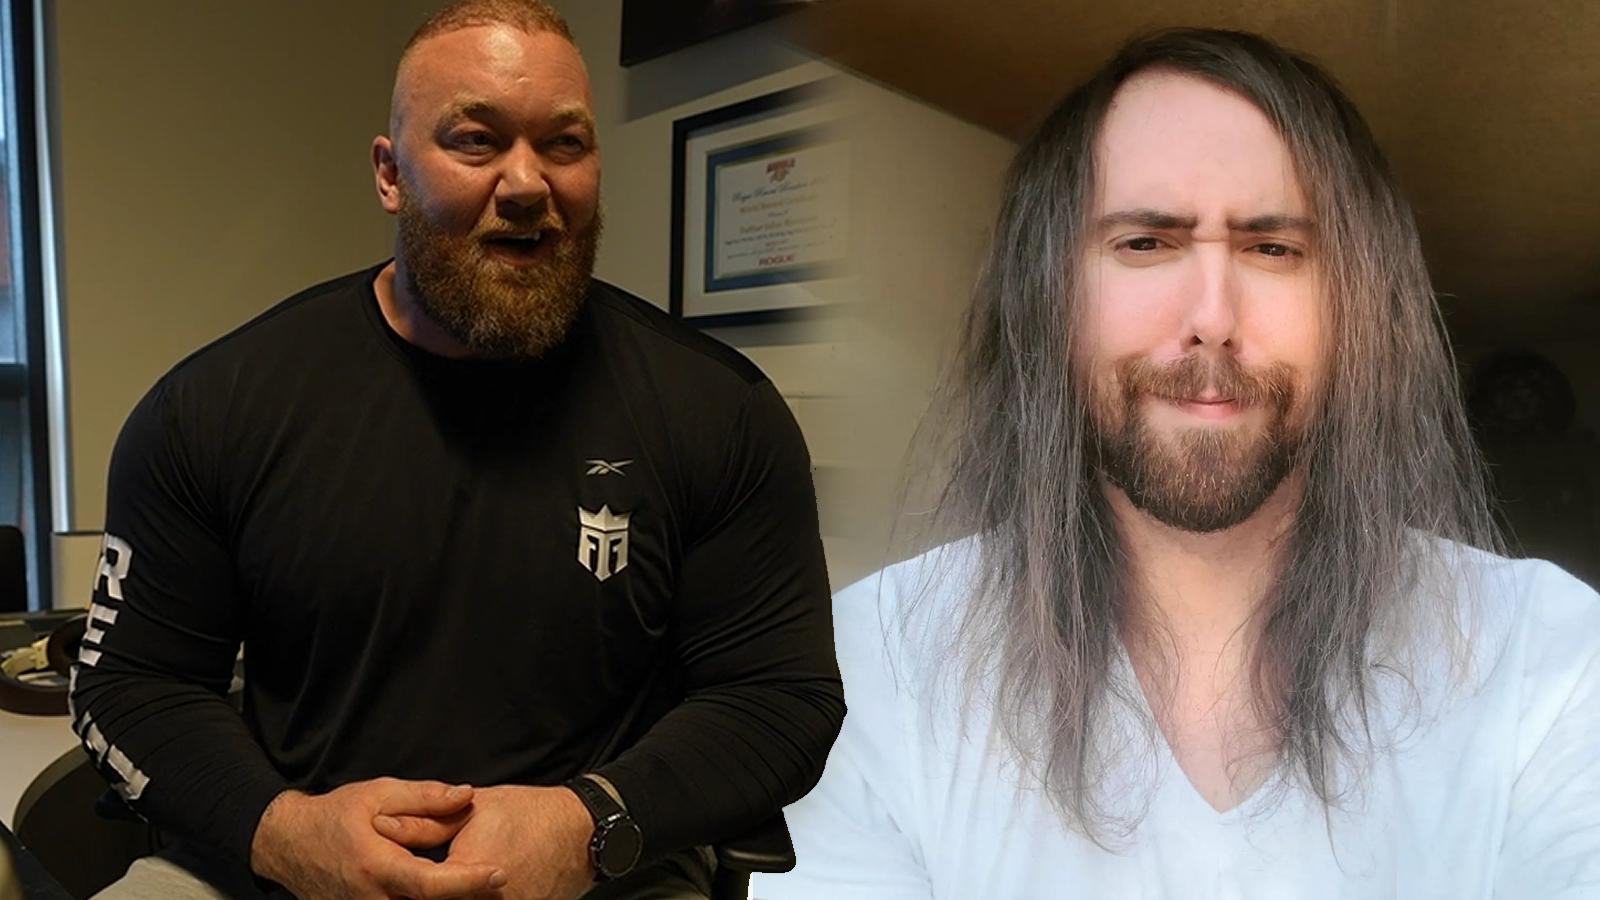 The Mountain and Asmongold